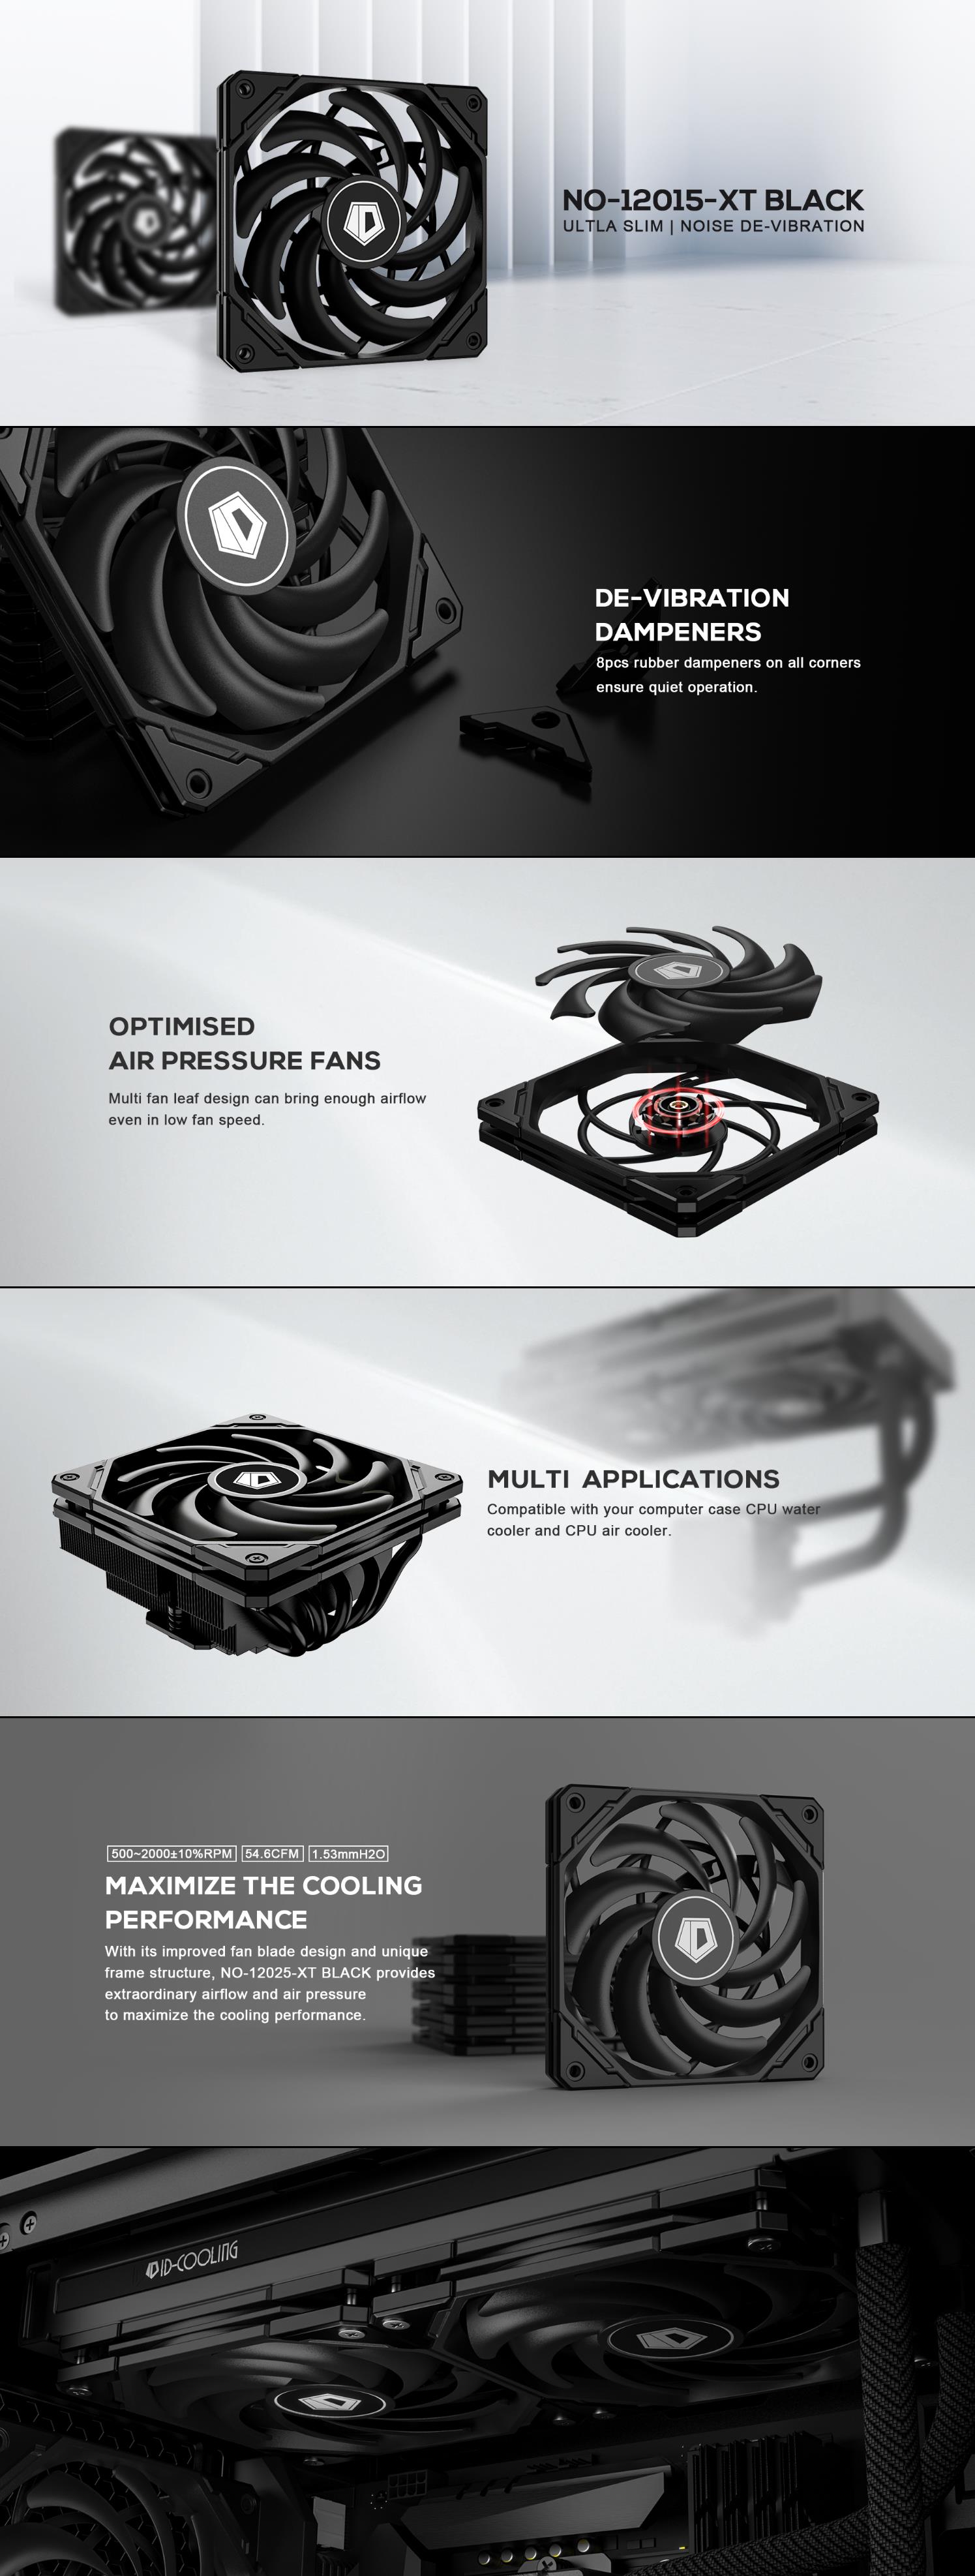 A large marketing image providing additional information about the product ID-COOLING XT Series Ultra Slim 120mm Case Fan - Black  - Additional alt info not provided